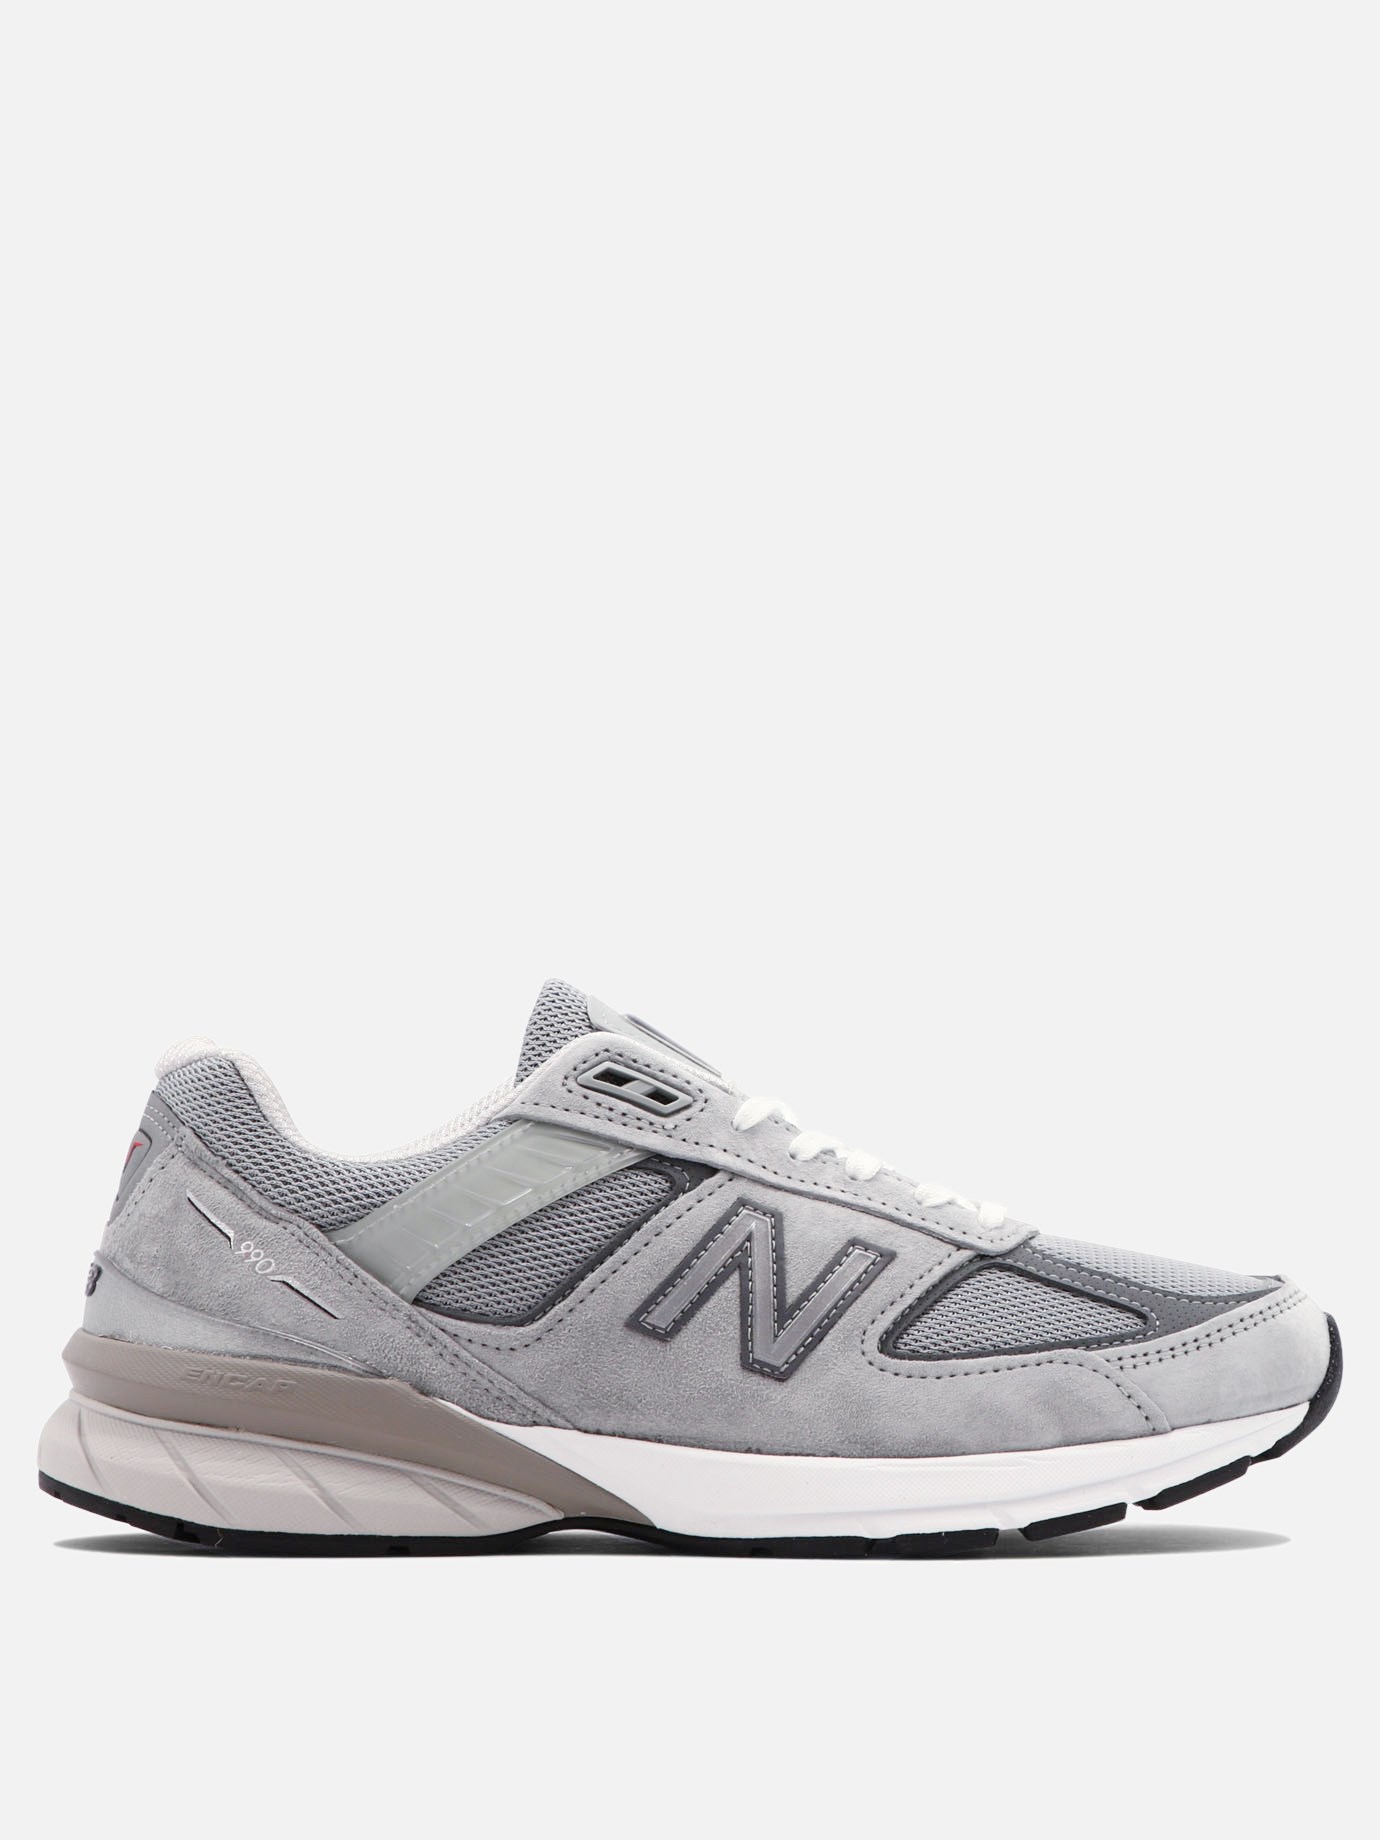 Sneaker  M990  by New Balance